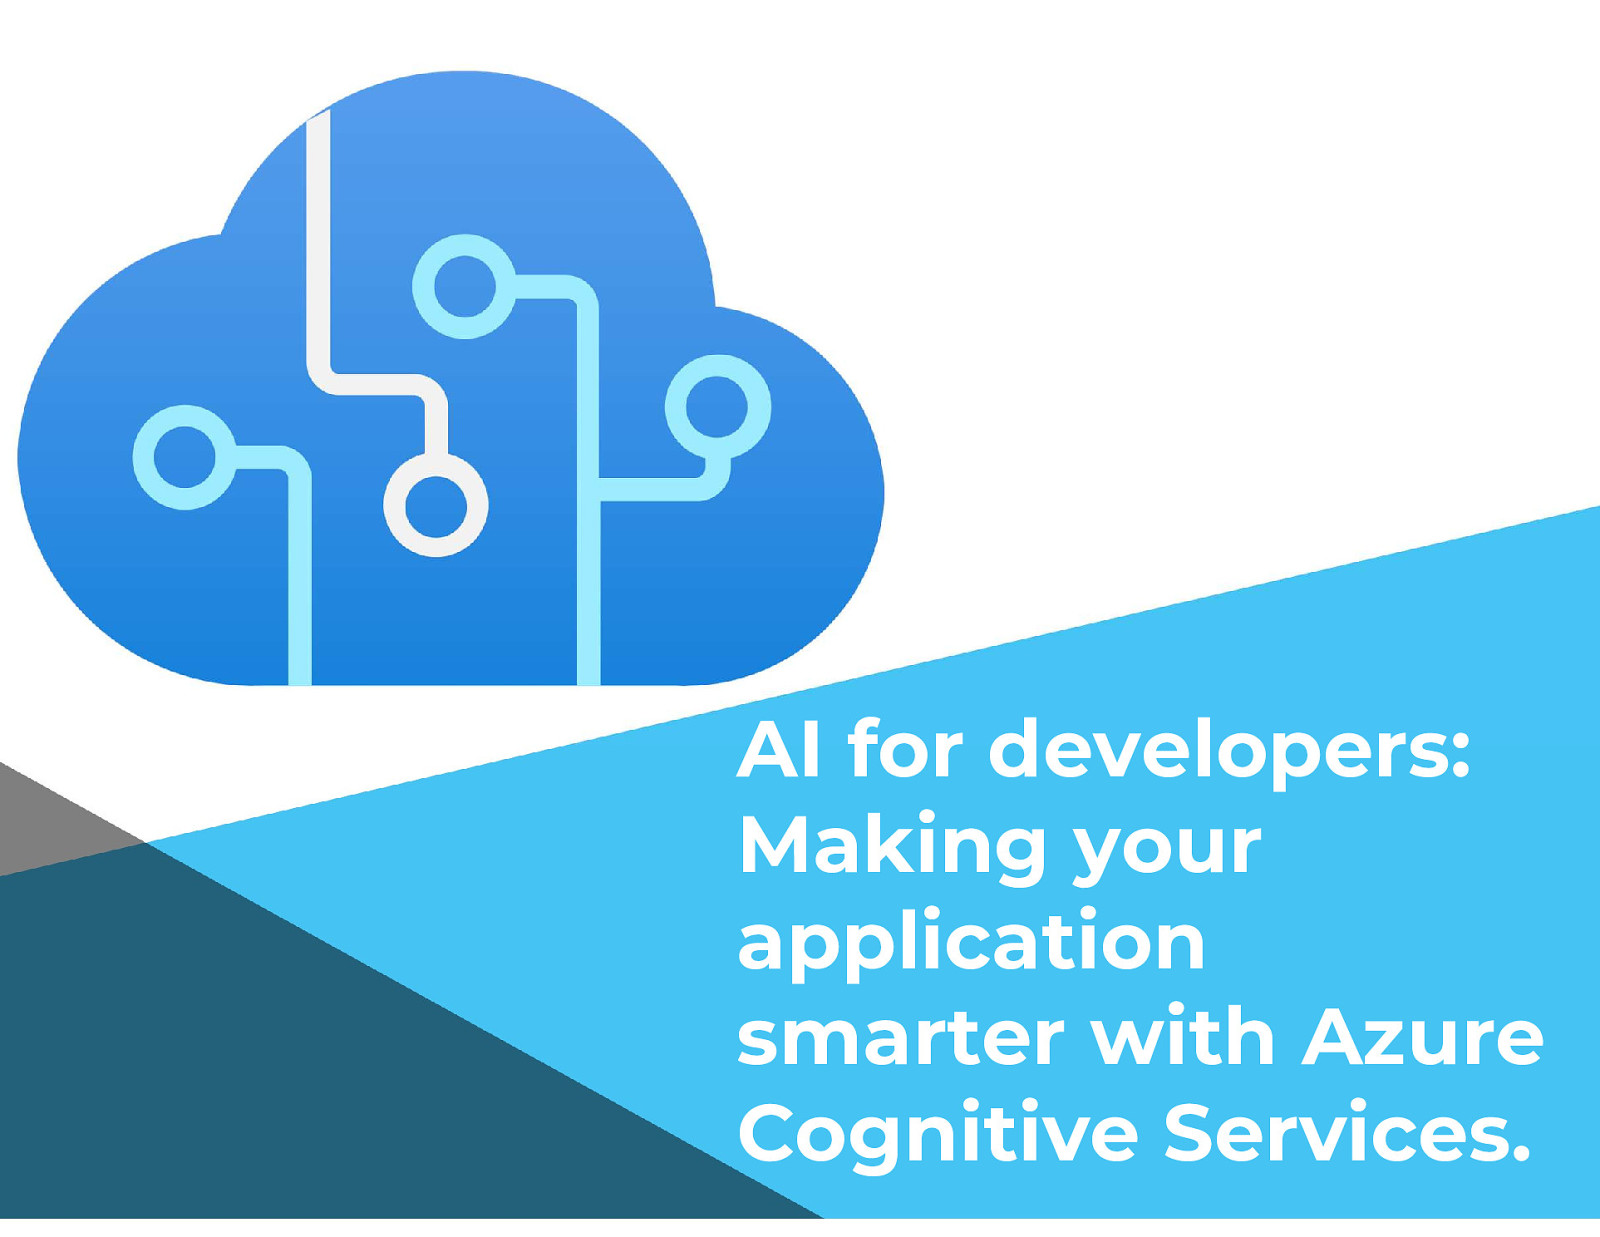 AI for developers: Making your application smarter with Azure Cognitive Services.